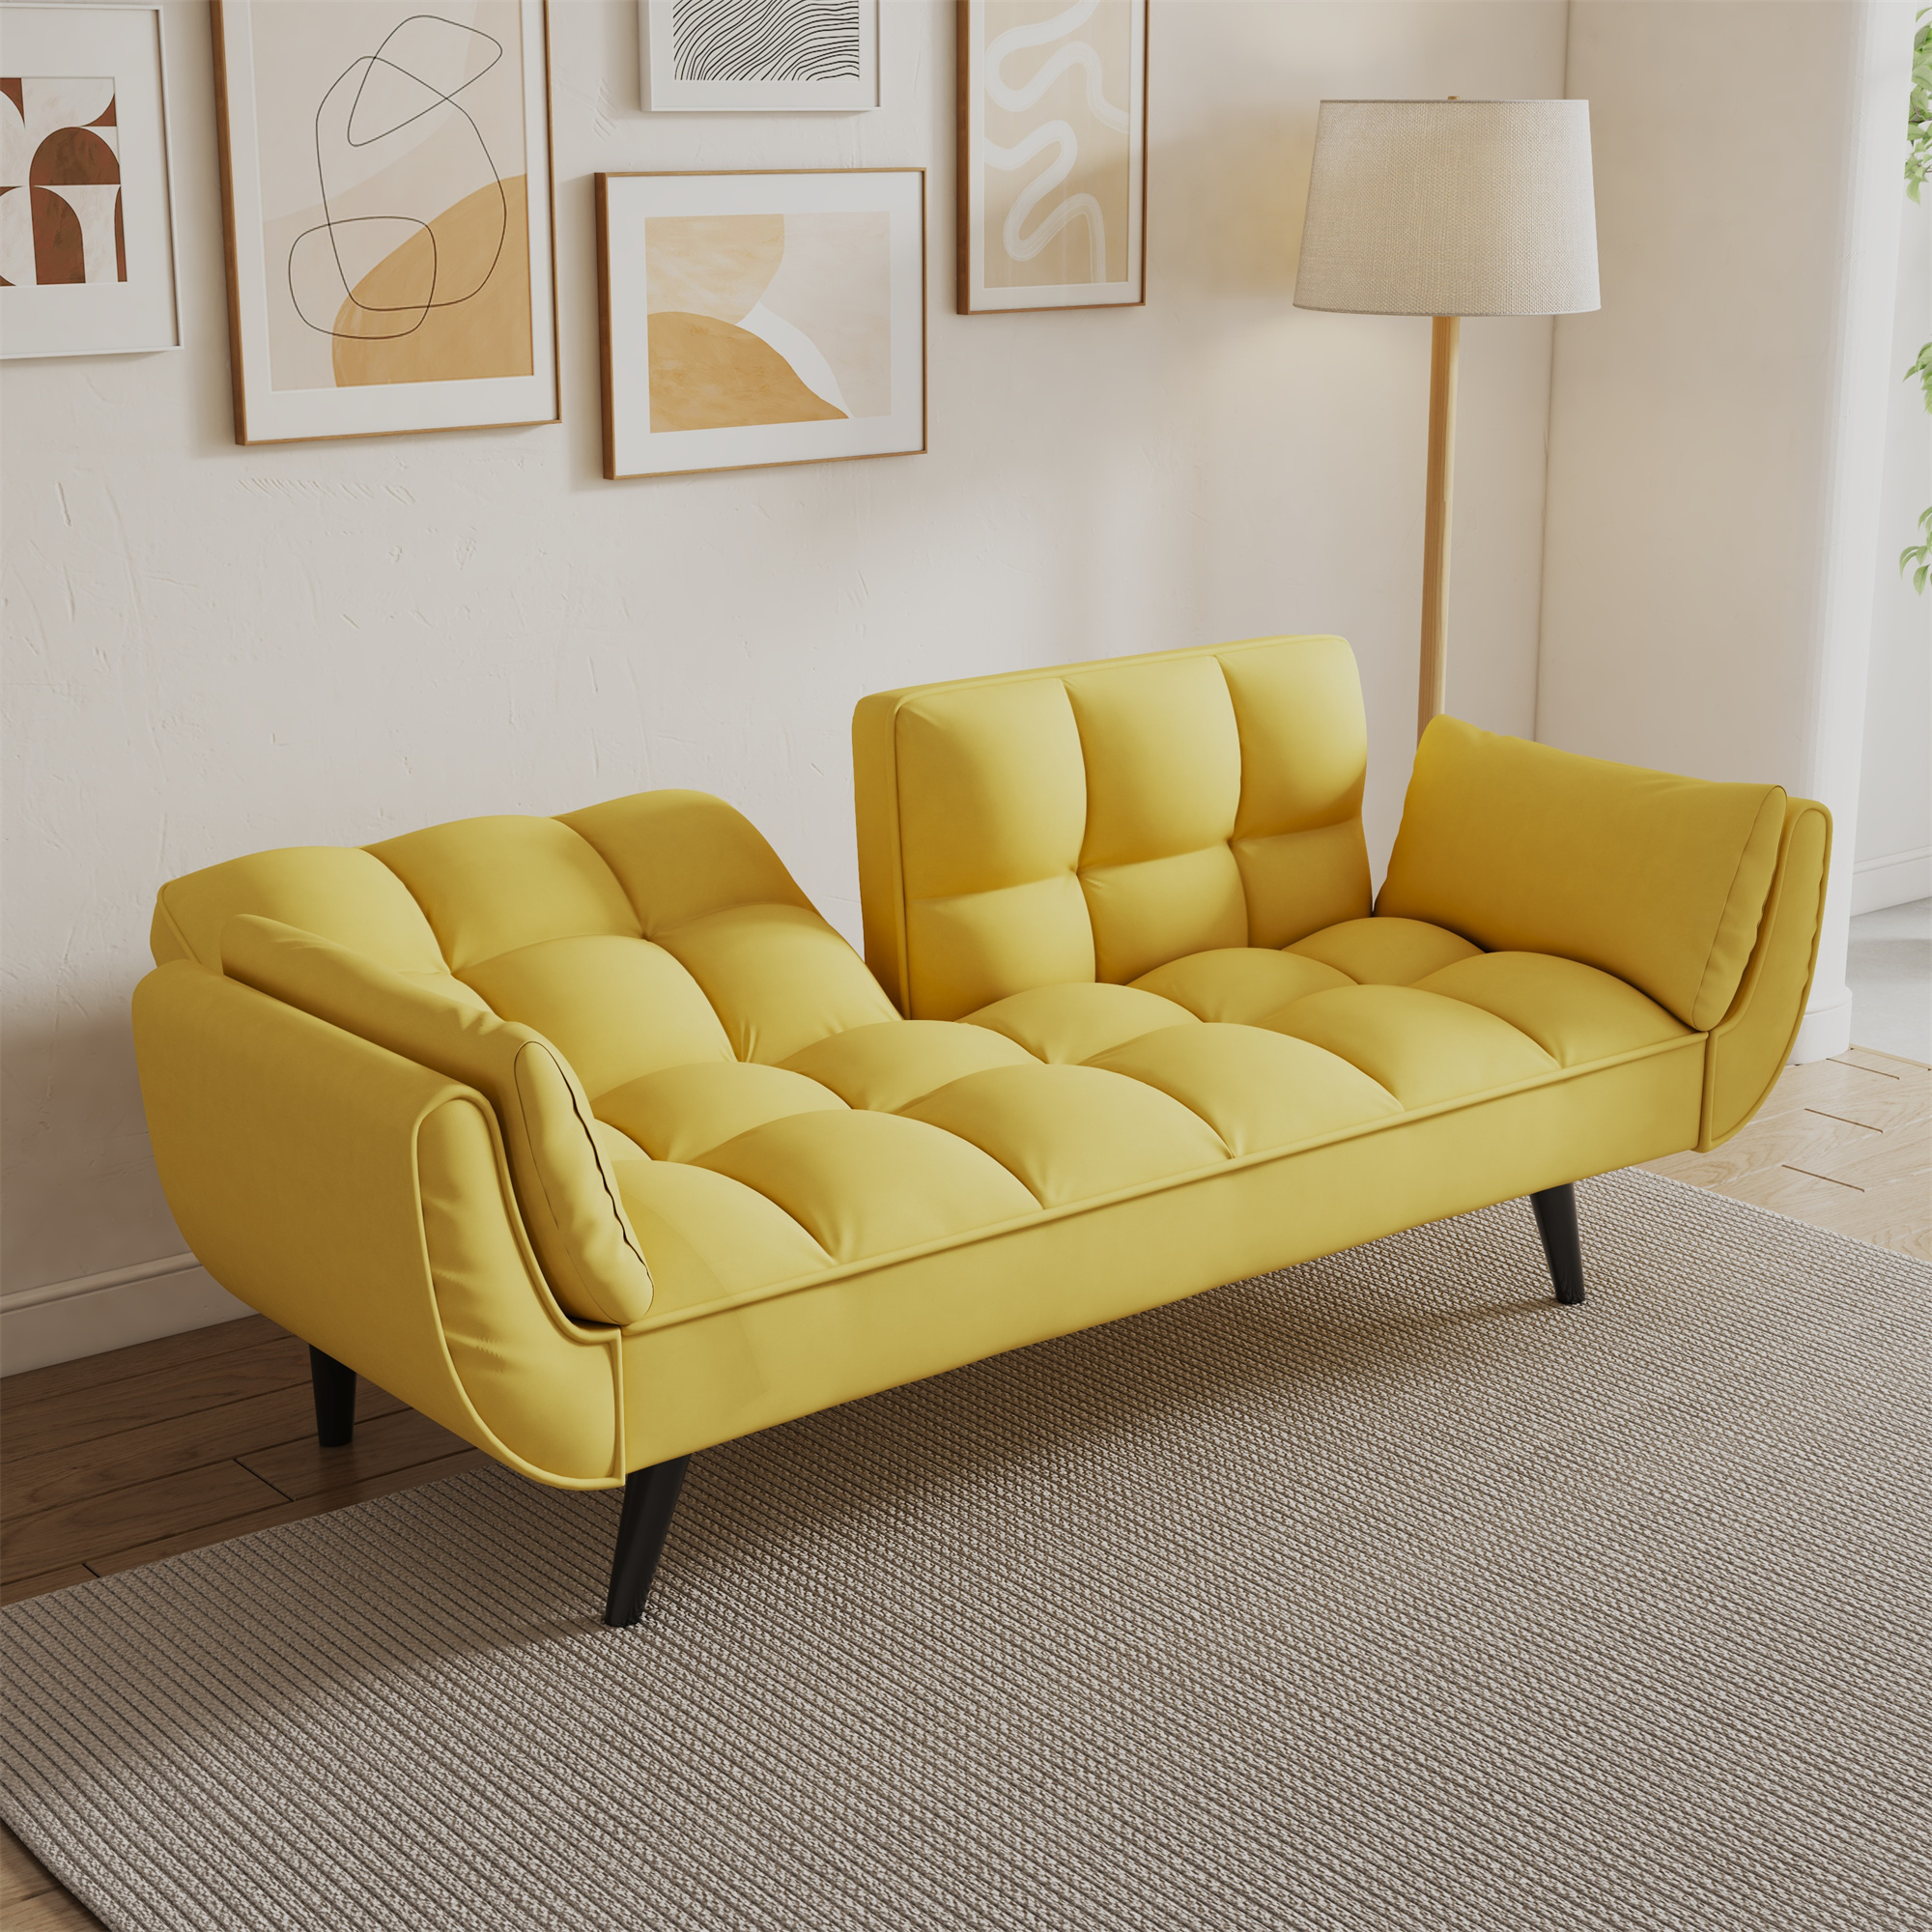 Aukfa 75" Flared Arm Futon Convertible Sofa Bed, Curved Sleeper Sofa for Home Office, Yellow - image 2 of 26